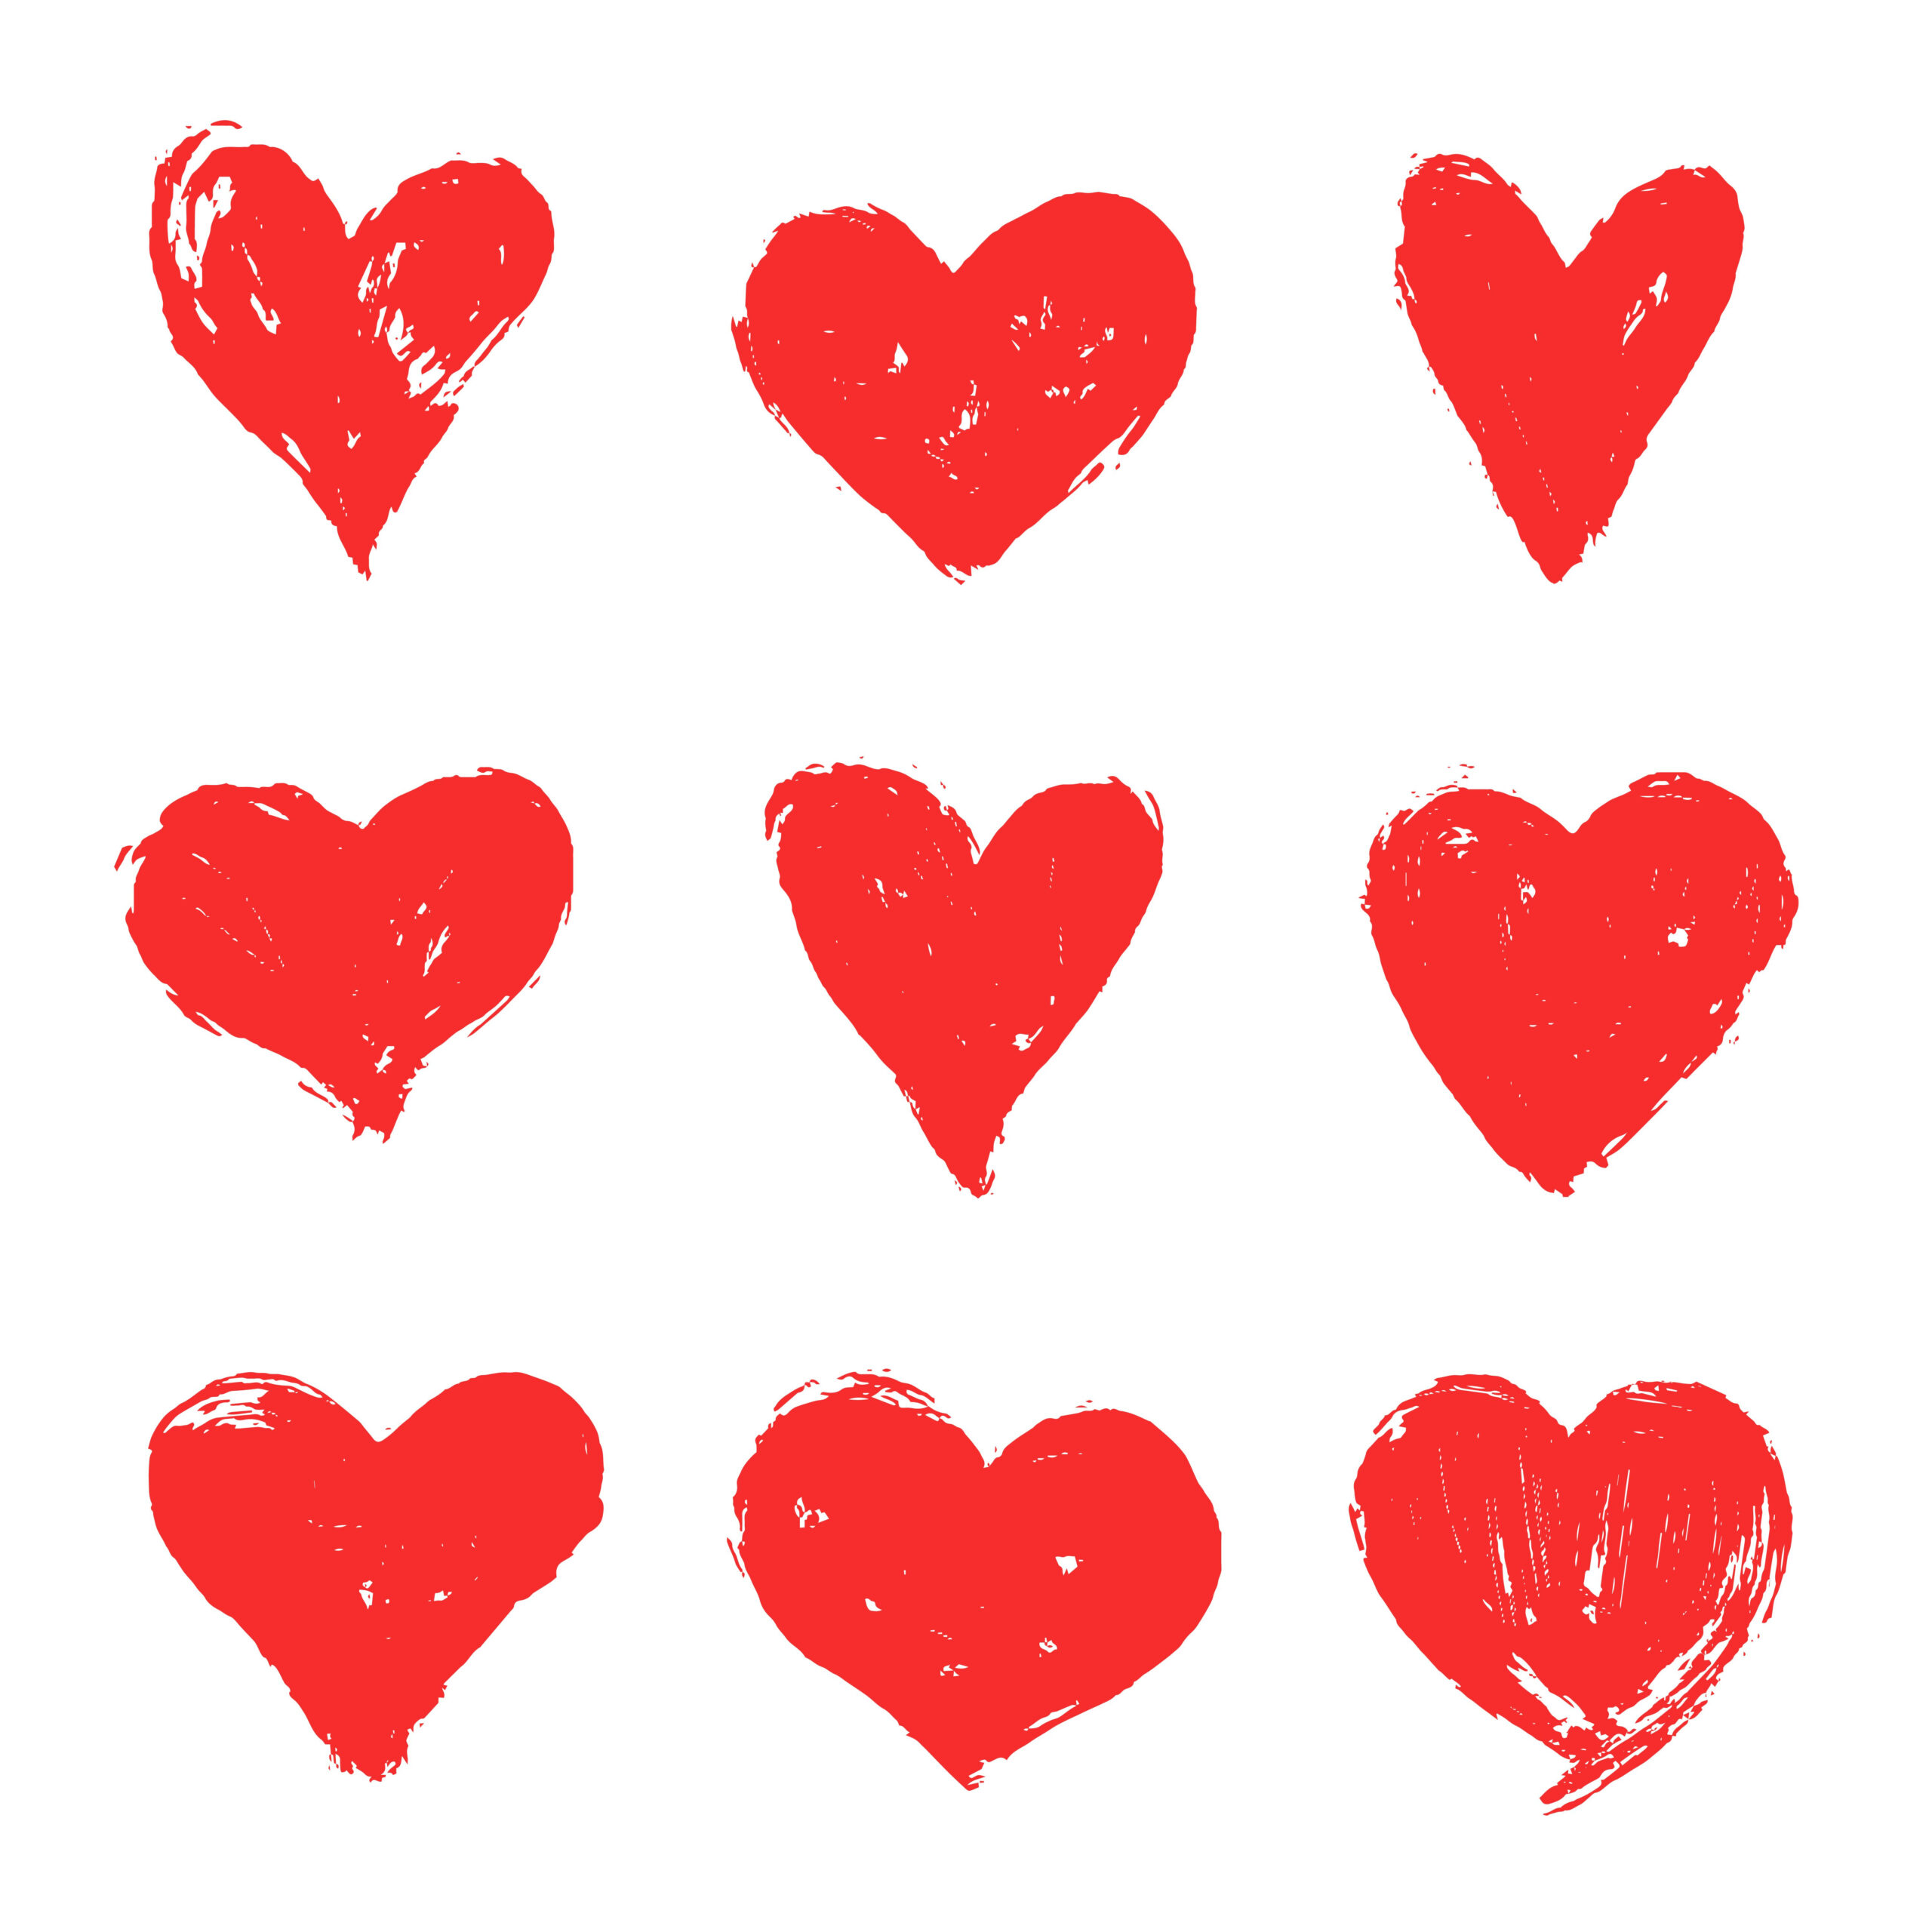 A set of red heart shapes on a white background.